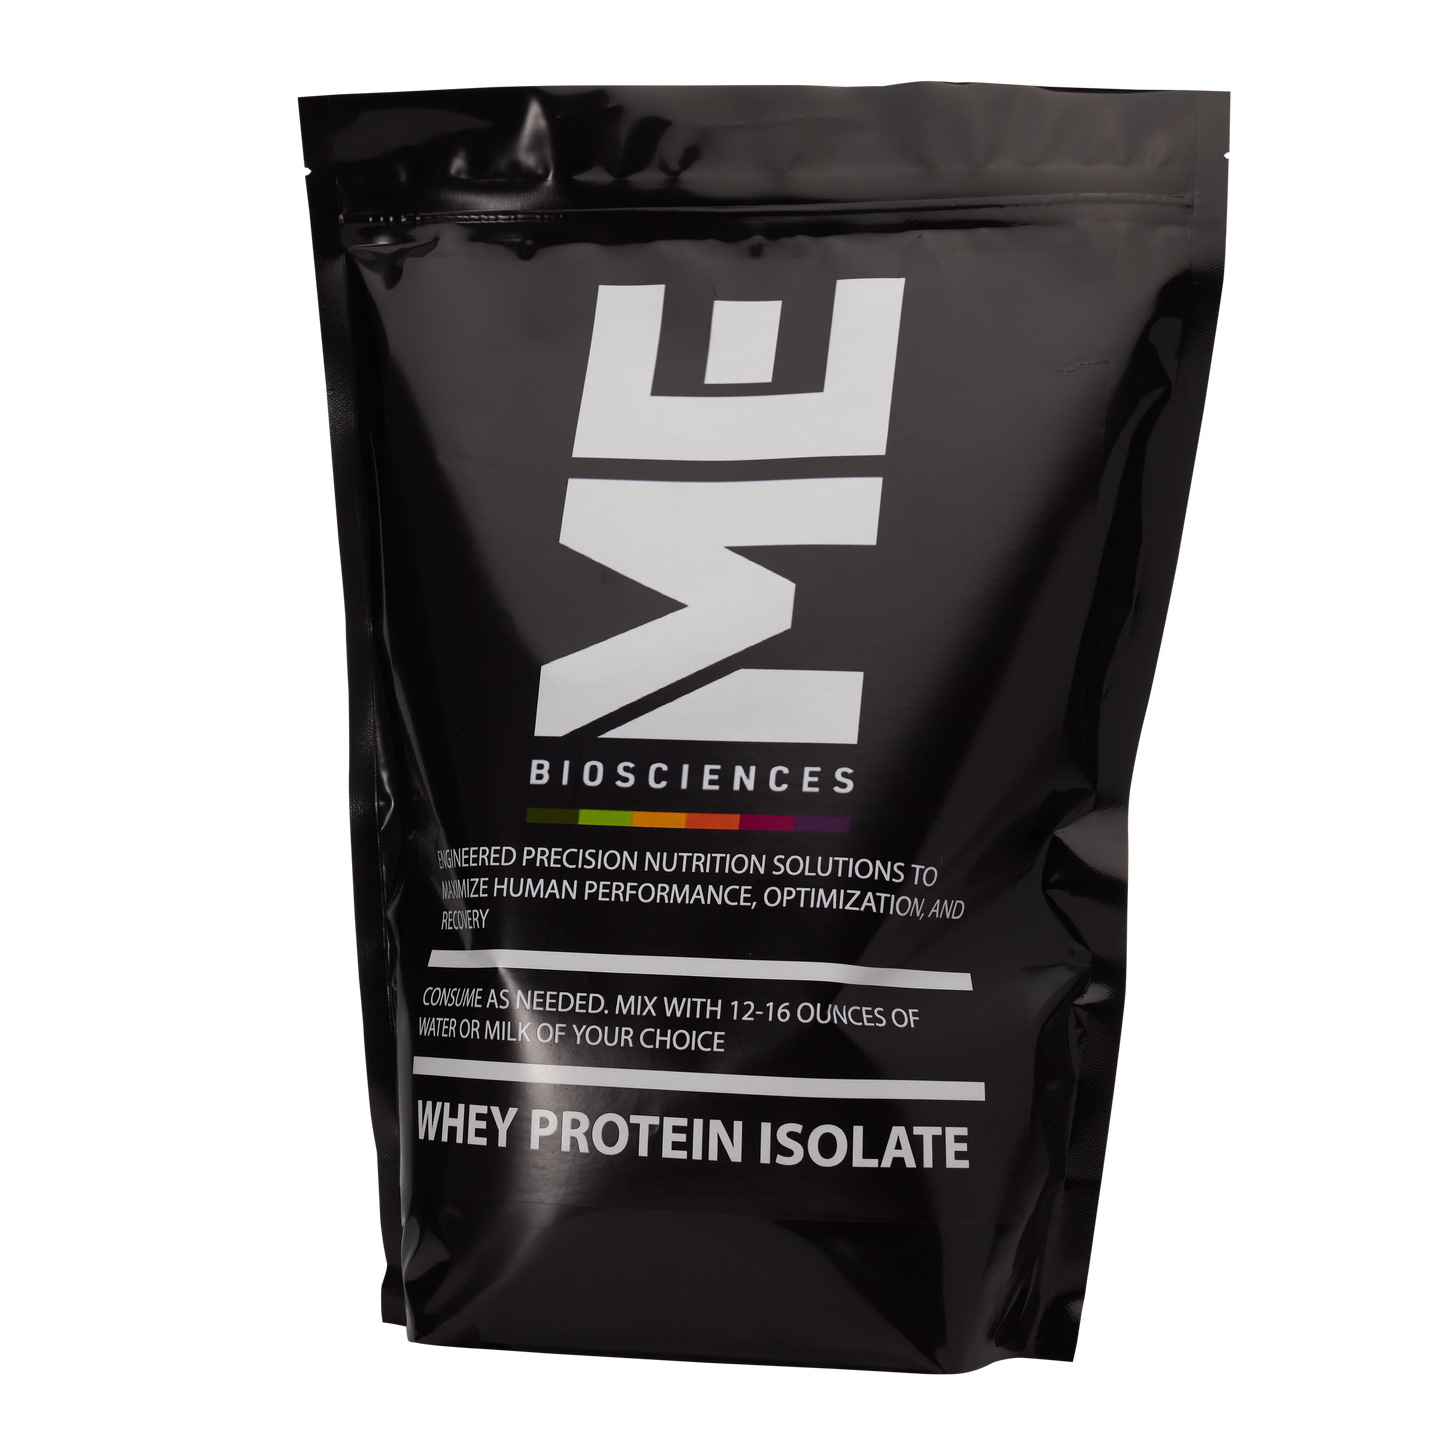 Chocolate Whey Protein Isolate